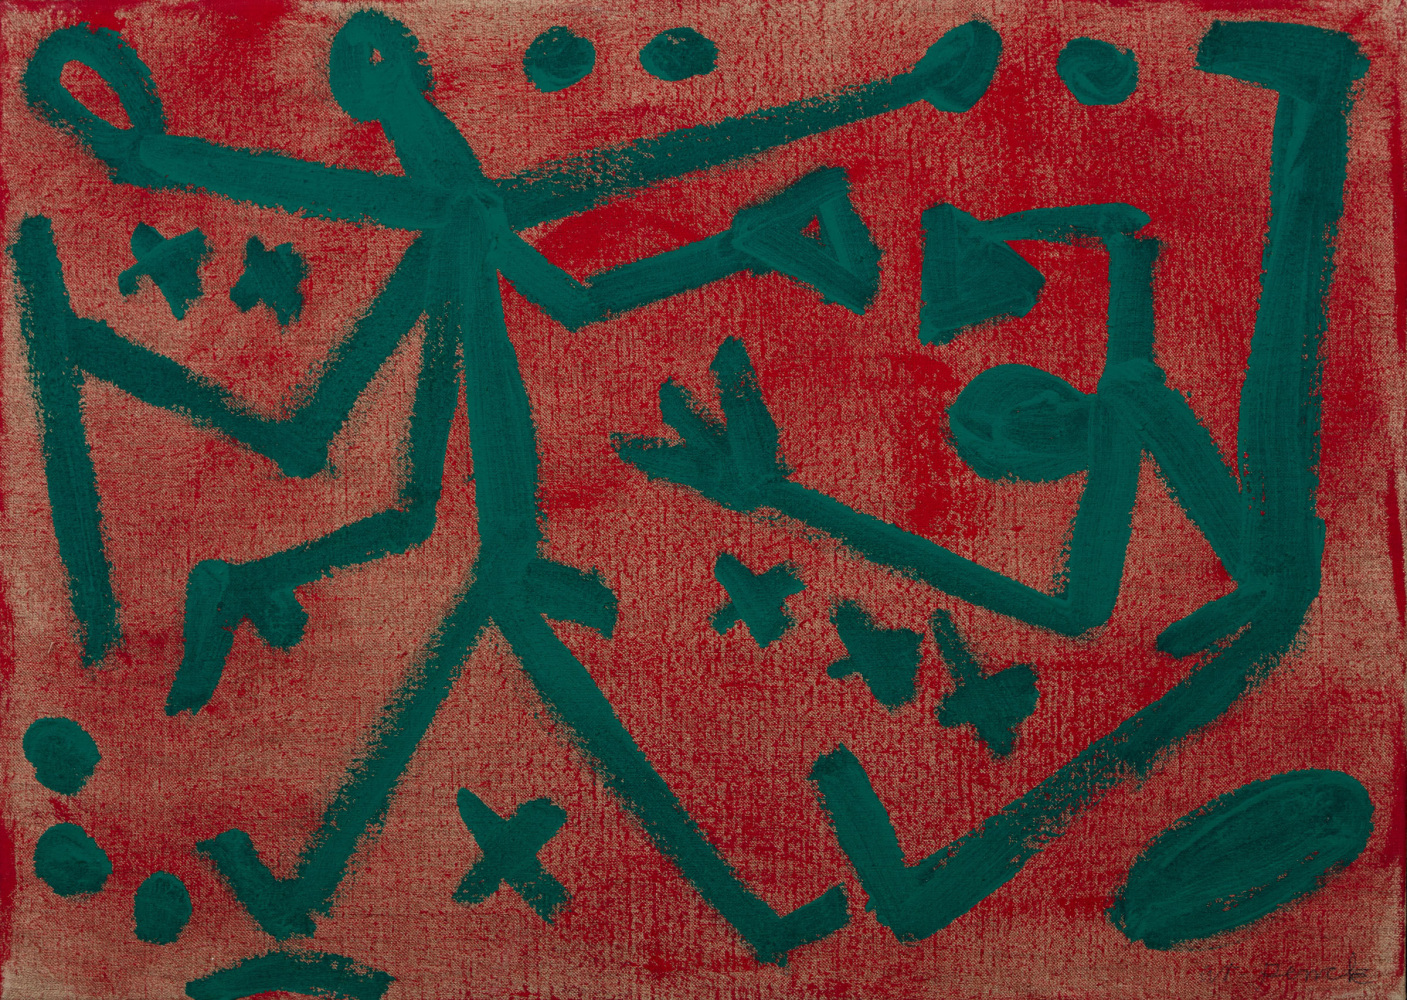 A.R. Penck, Untitled, 1987-1988